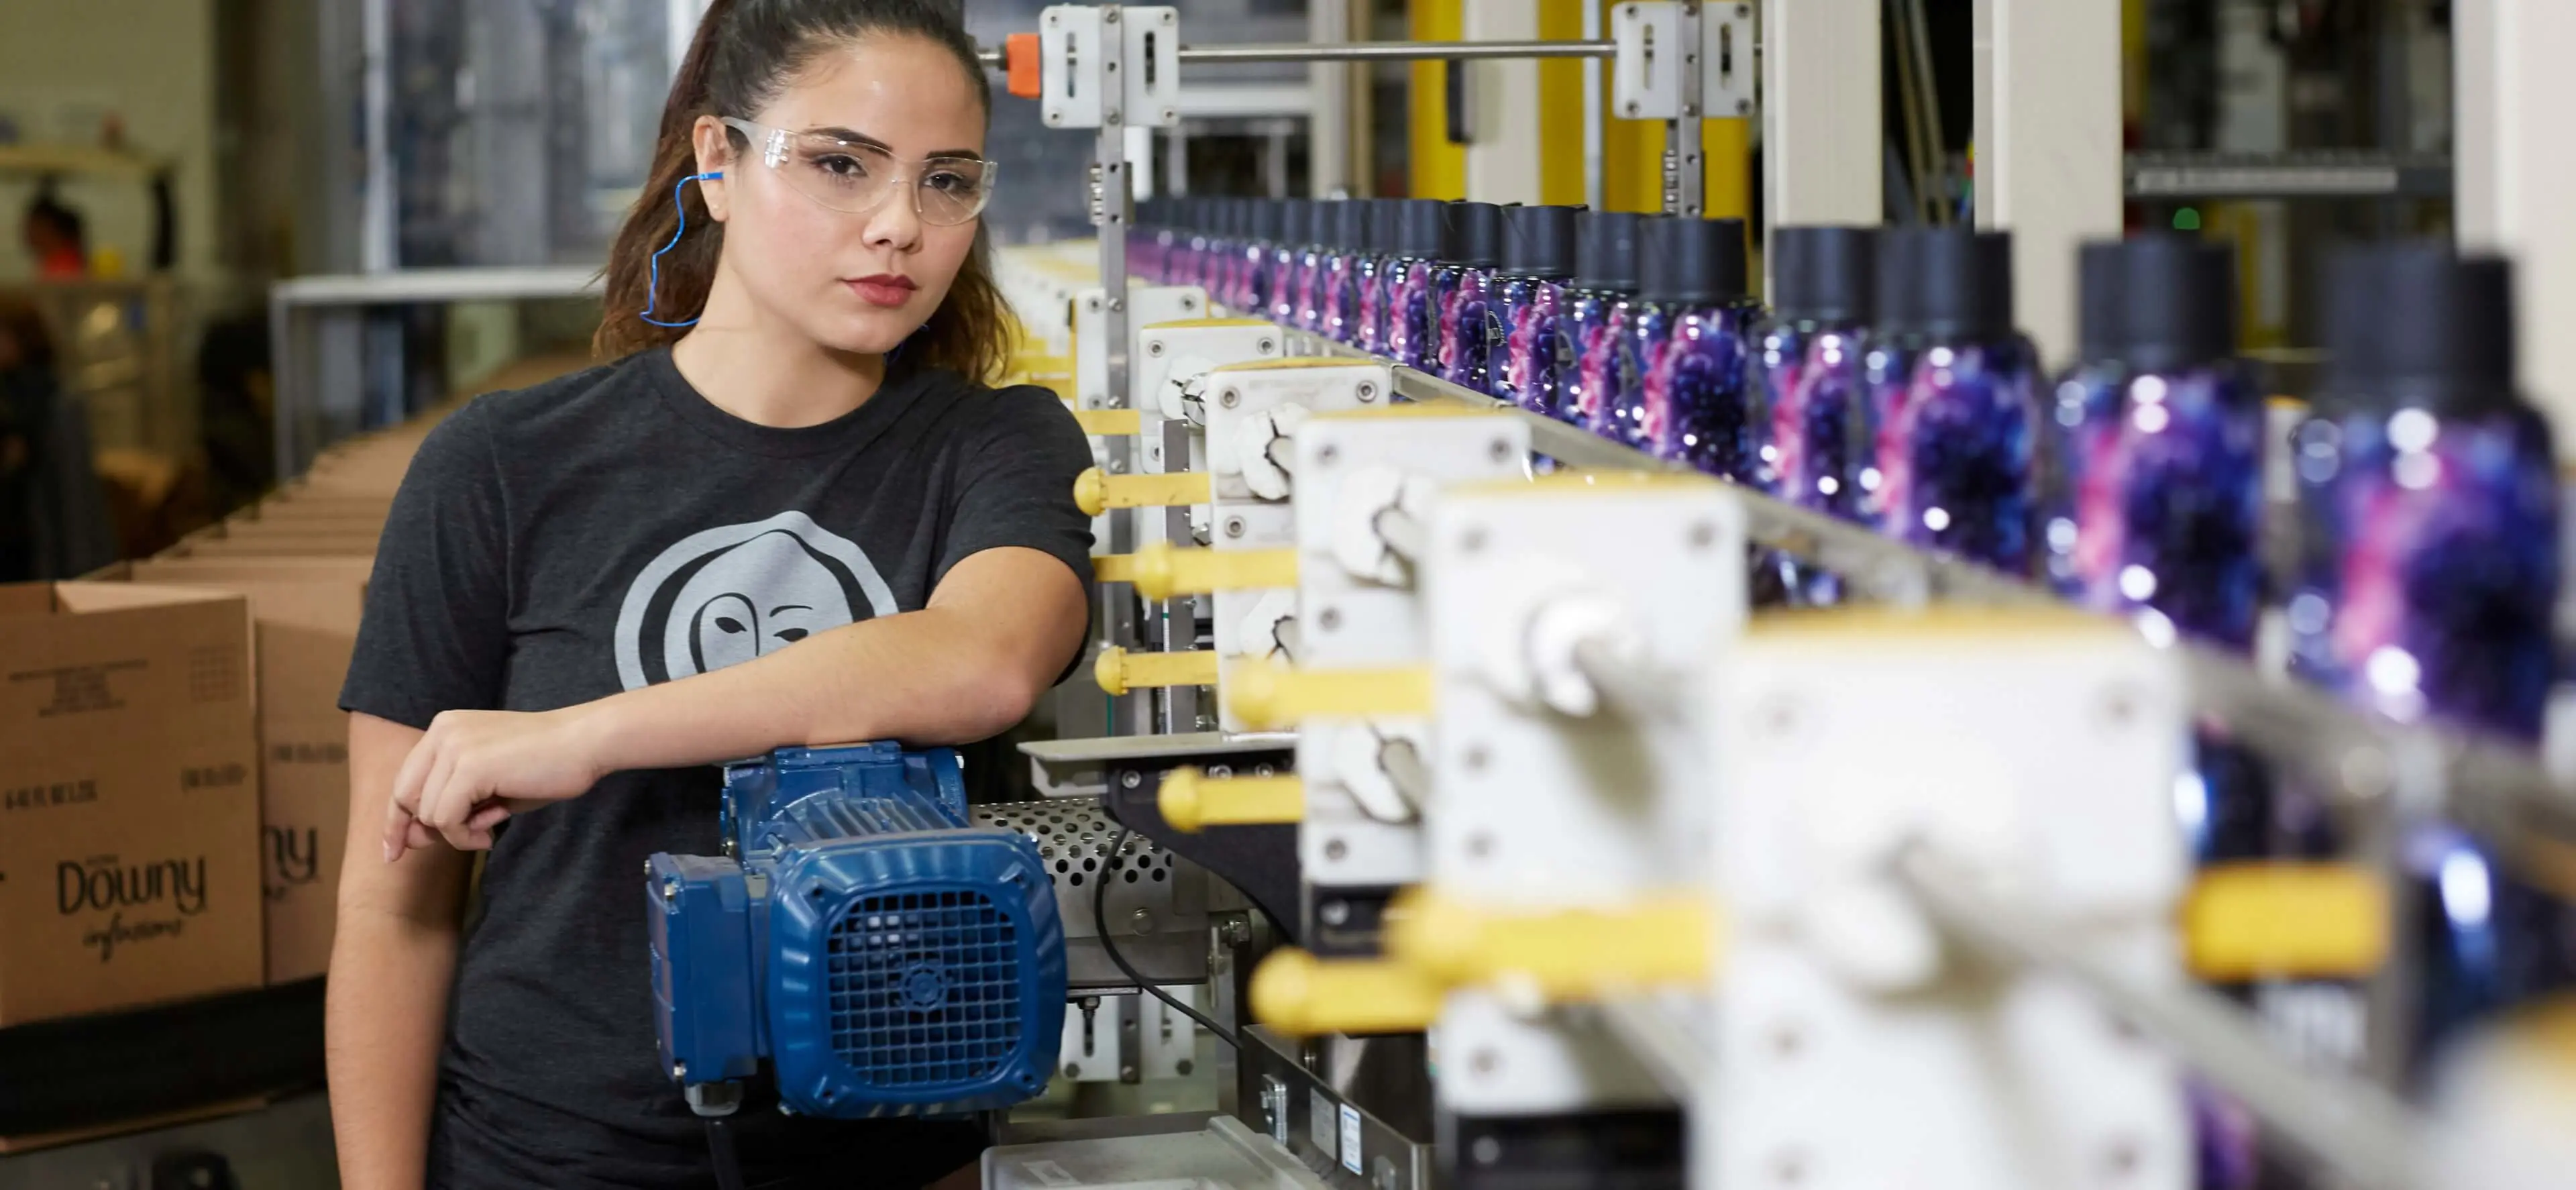 Female P&G plant employee oversees production line of Downy fabric softener